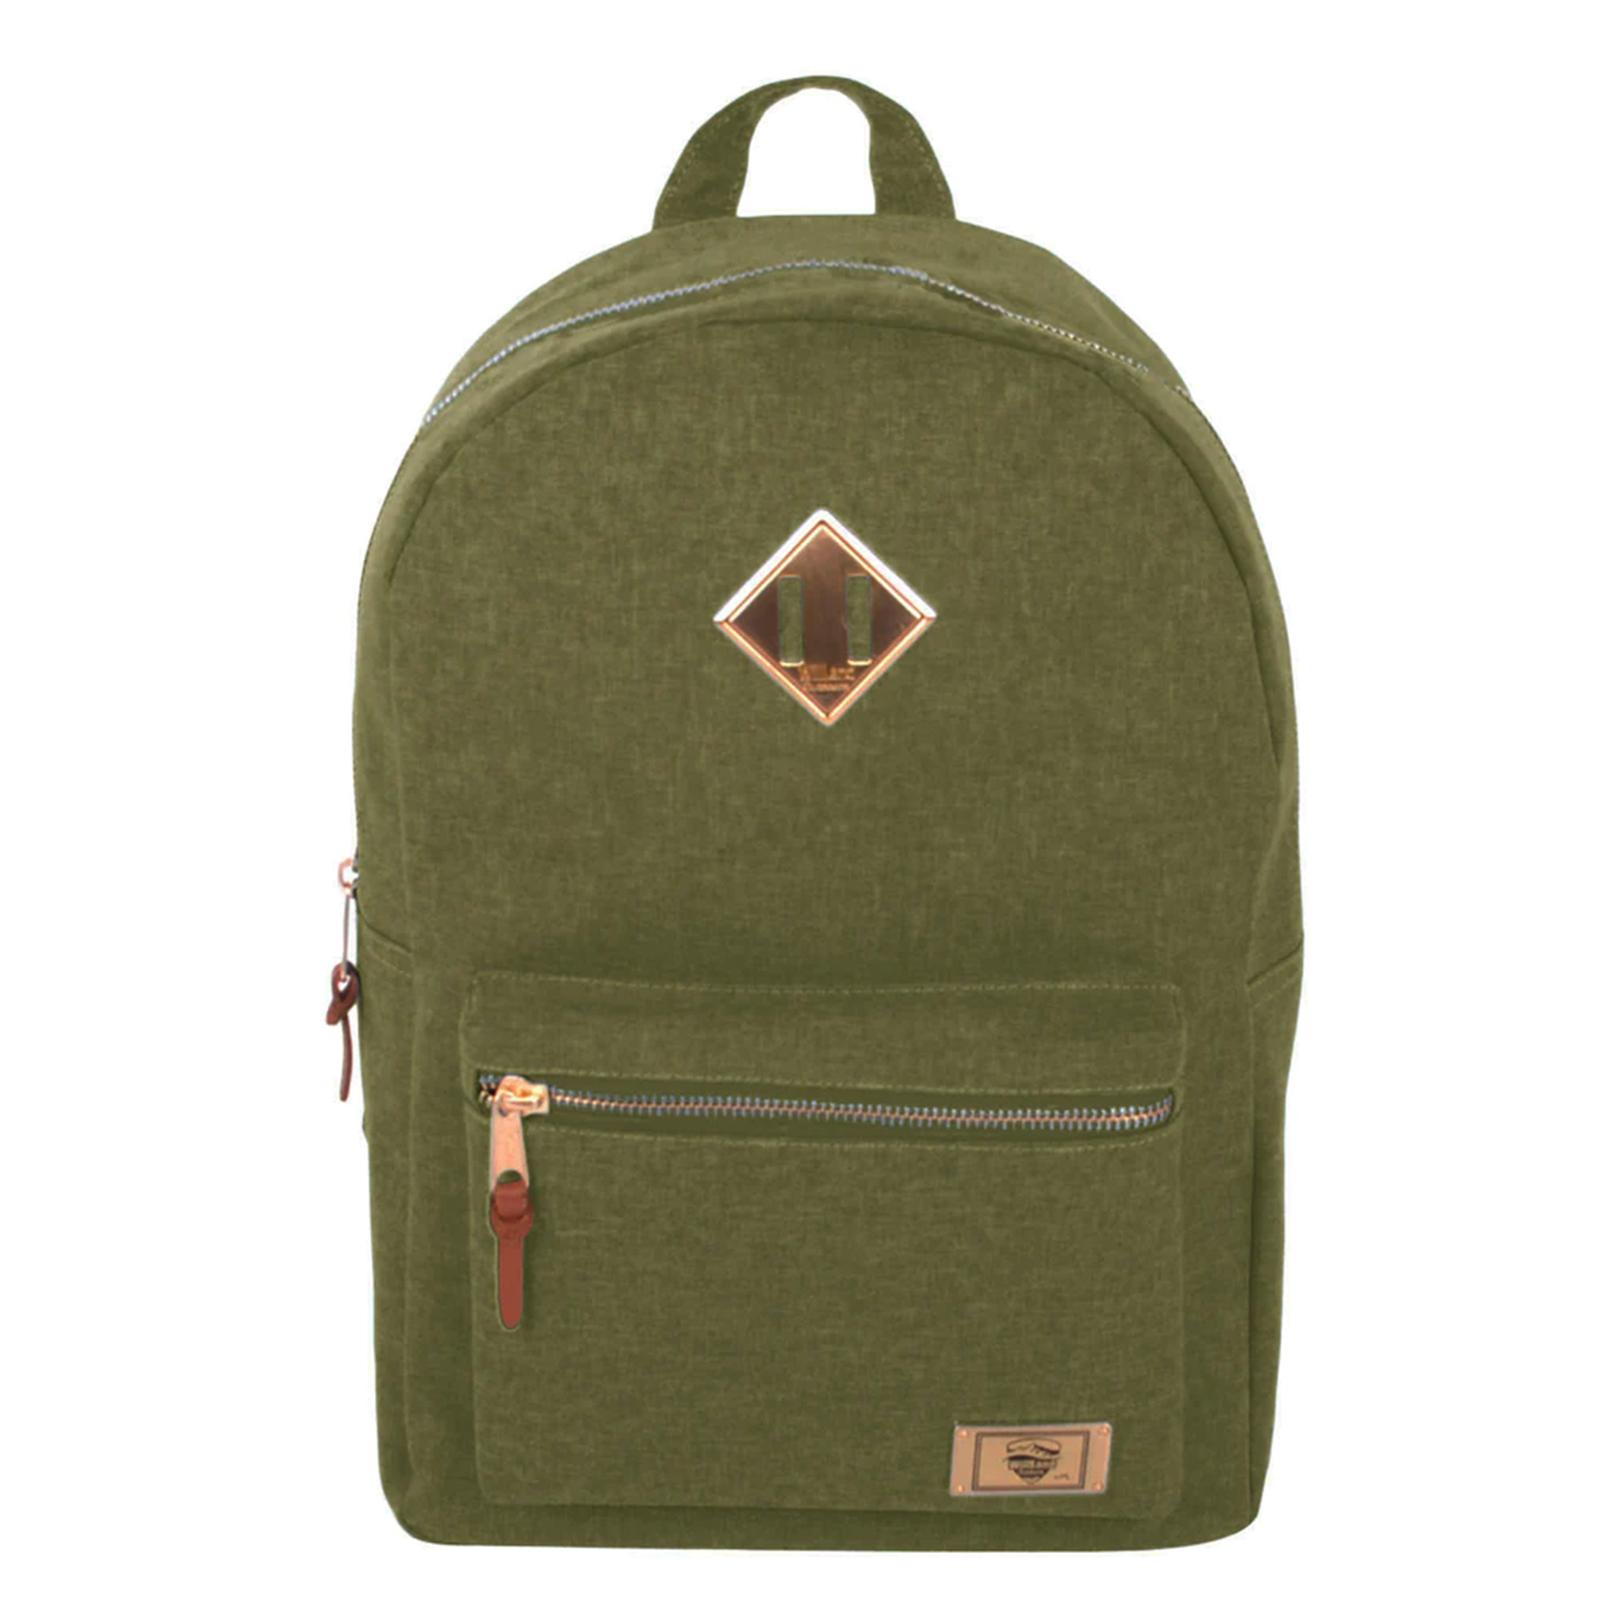 BACKPACK: GROTTO